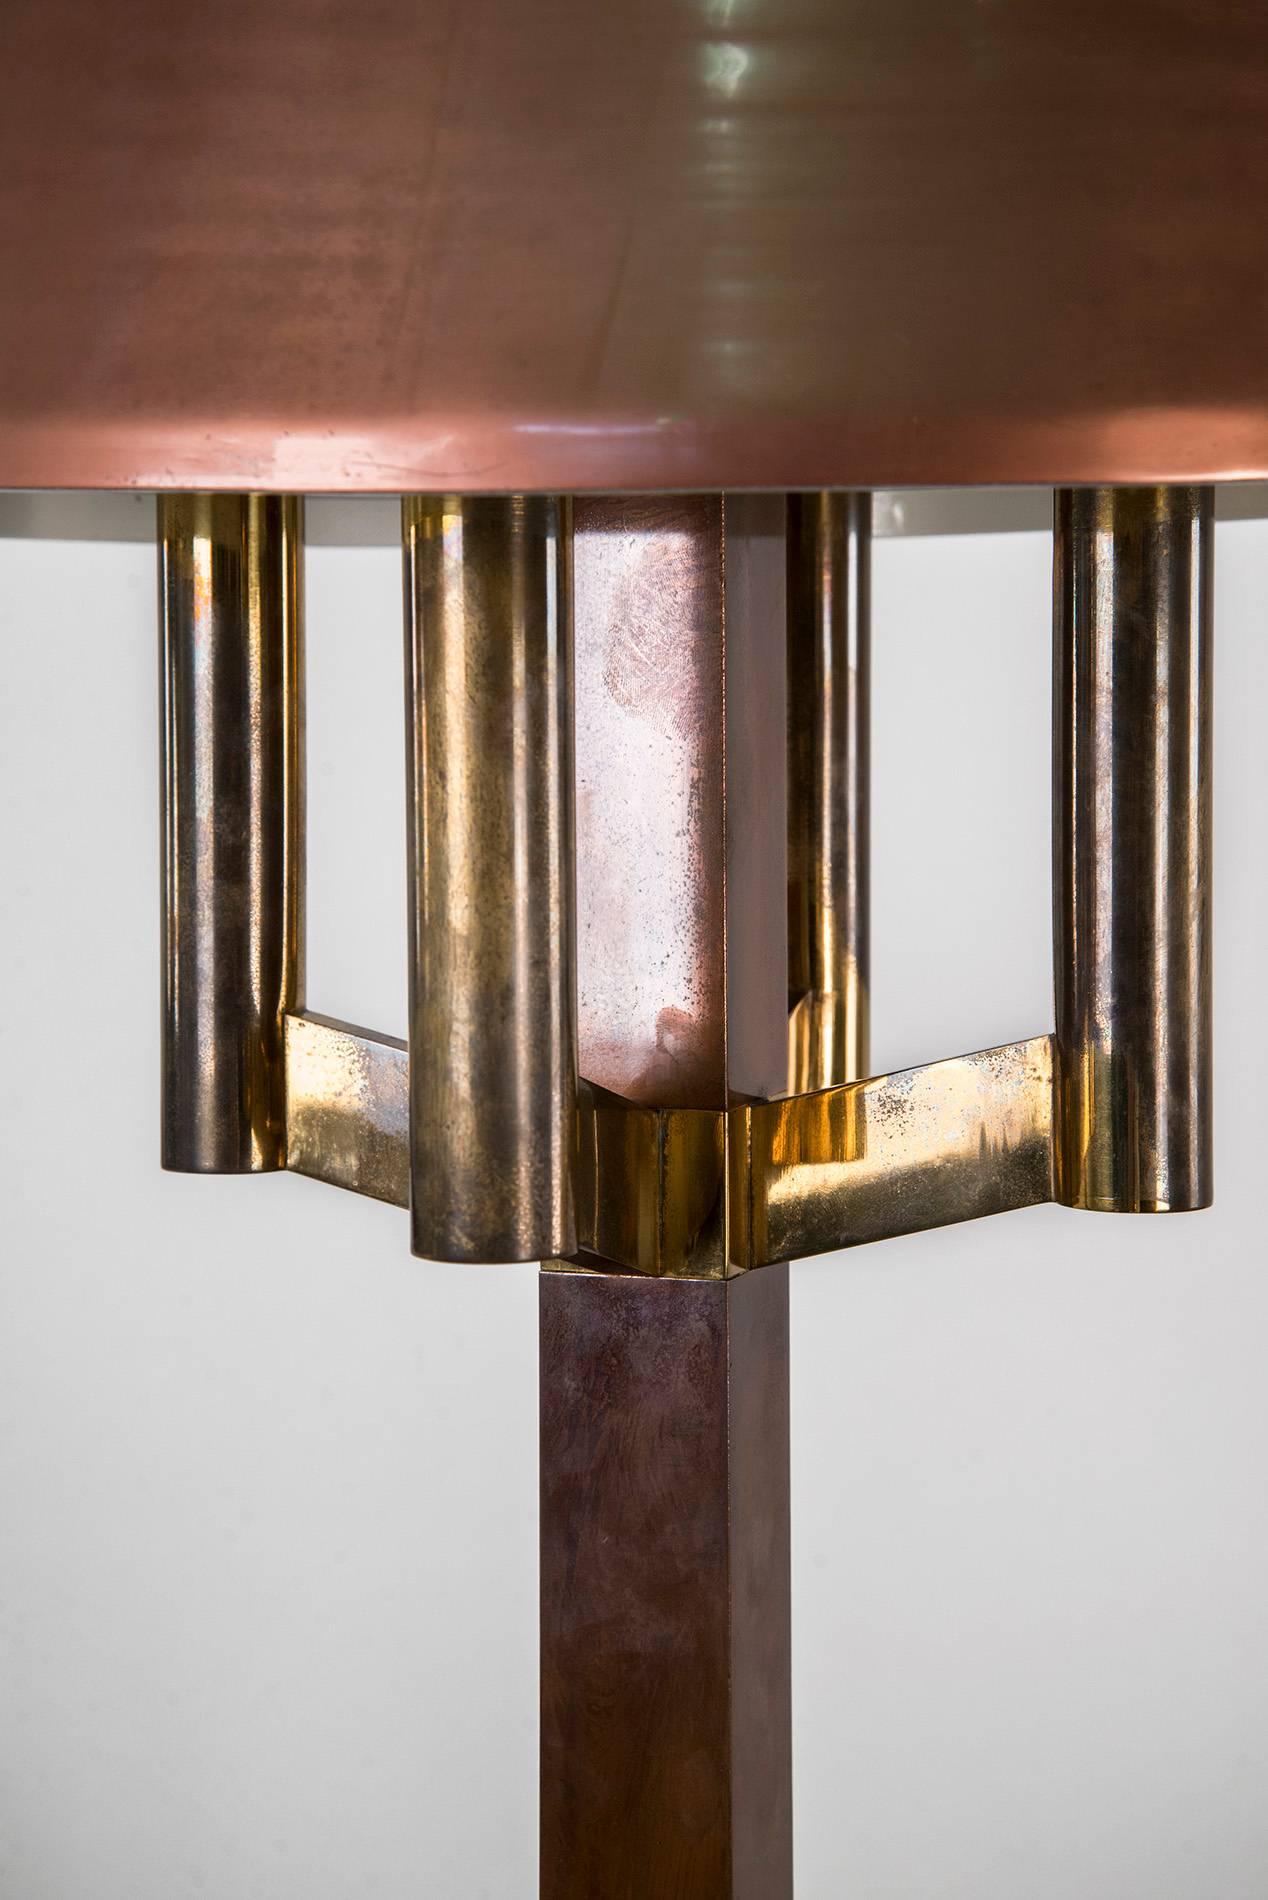 Monumental table lamp manufactured in Italy in the 1930s, coming from a cruise ship. Copper and brass structure. Good original vintage conditions.